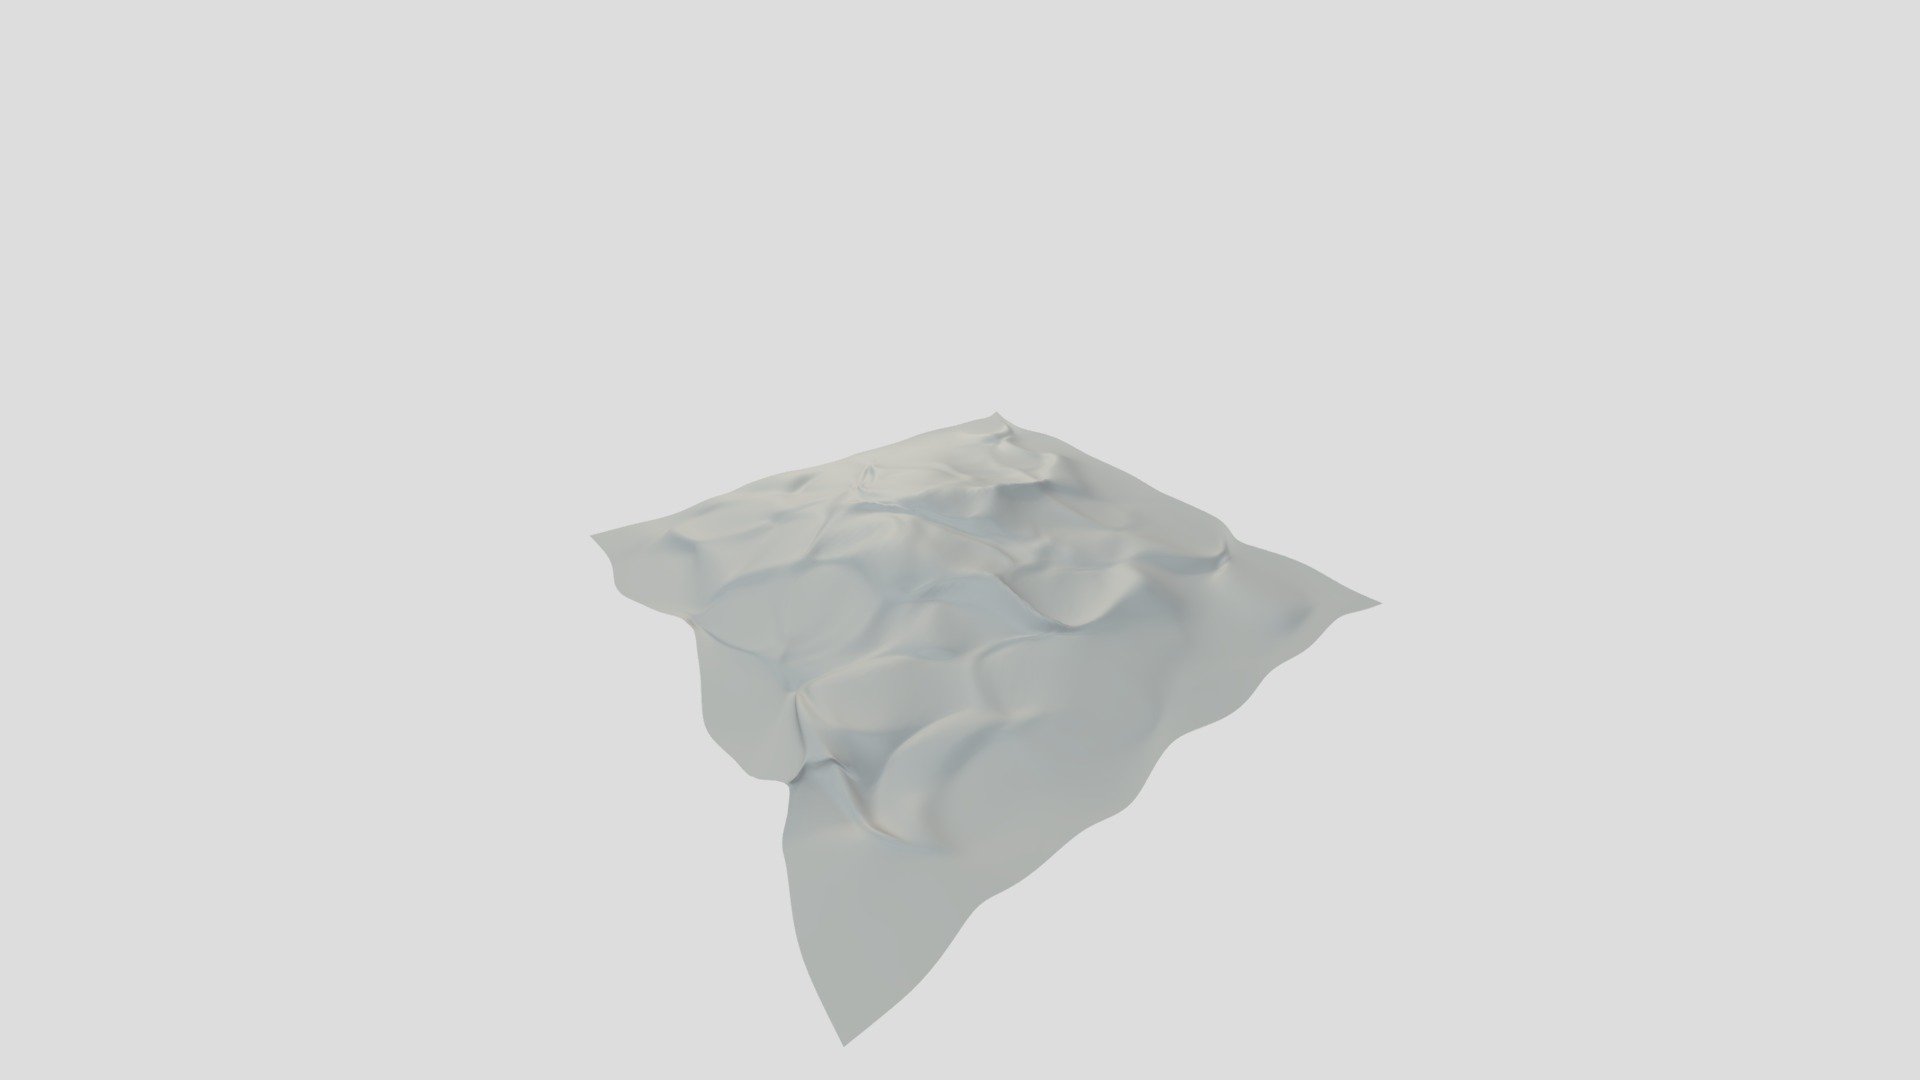 This is my first ever 3d model, I was just messing around with the sculpting setting and I managed to do this. I know it's a bad and simple model.
- It is recommendable that you change the paper texture to the image you want, for example, you can put some text in it to make it look like a paper wtih text or something like that - Crumpled paper - Download Free 3D model by Darxkl05 3d model